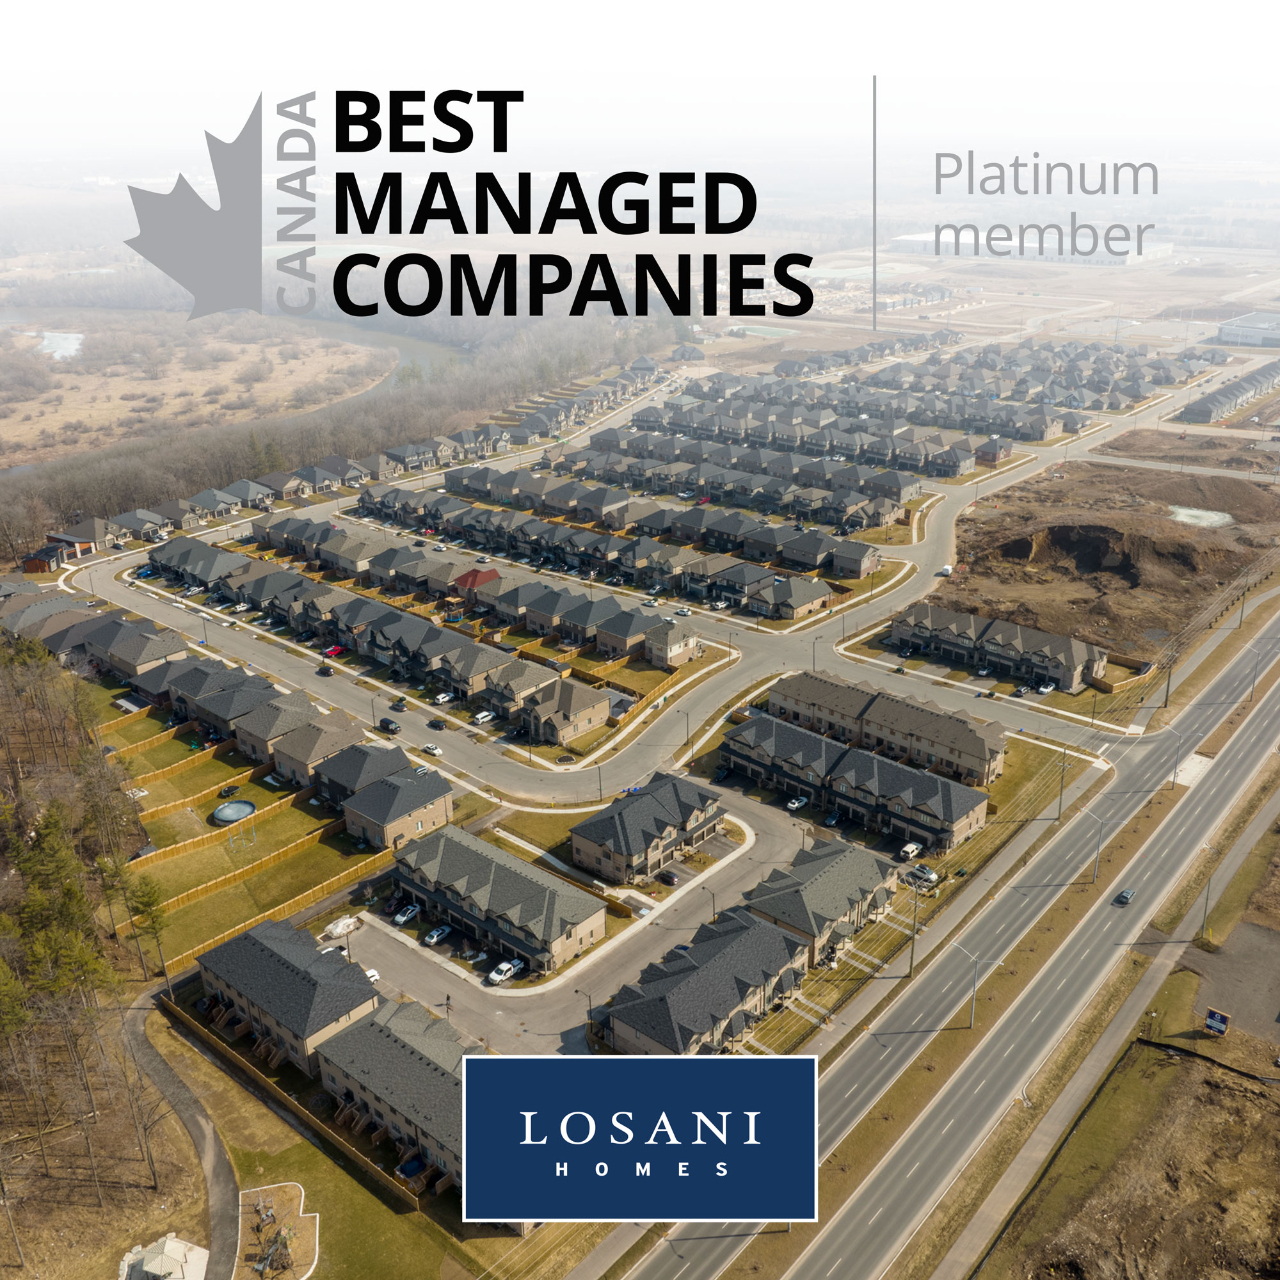 Losani Homes achieves Platinum Status for the 9th Consecutive Year